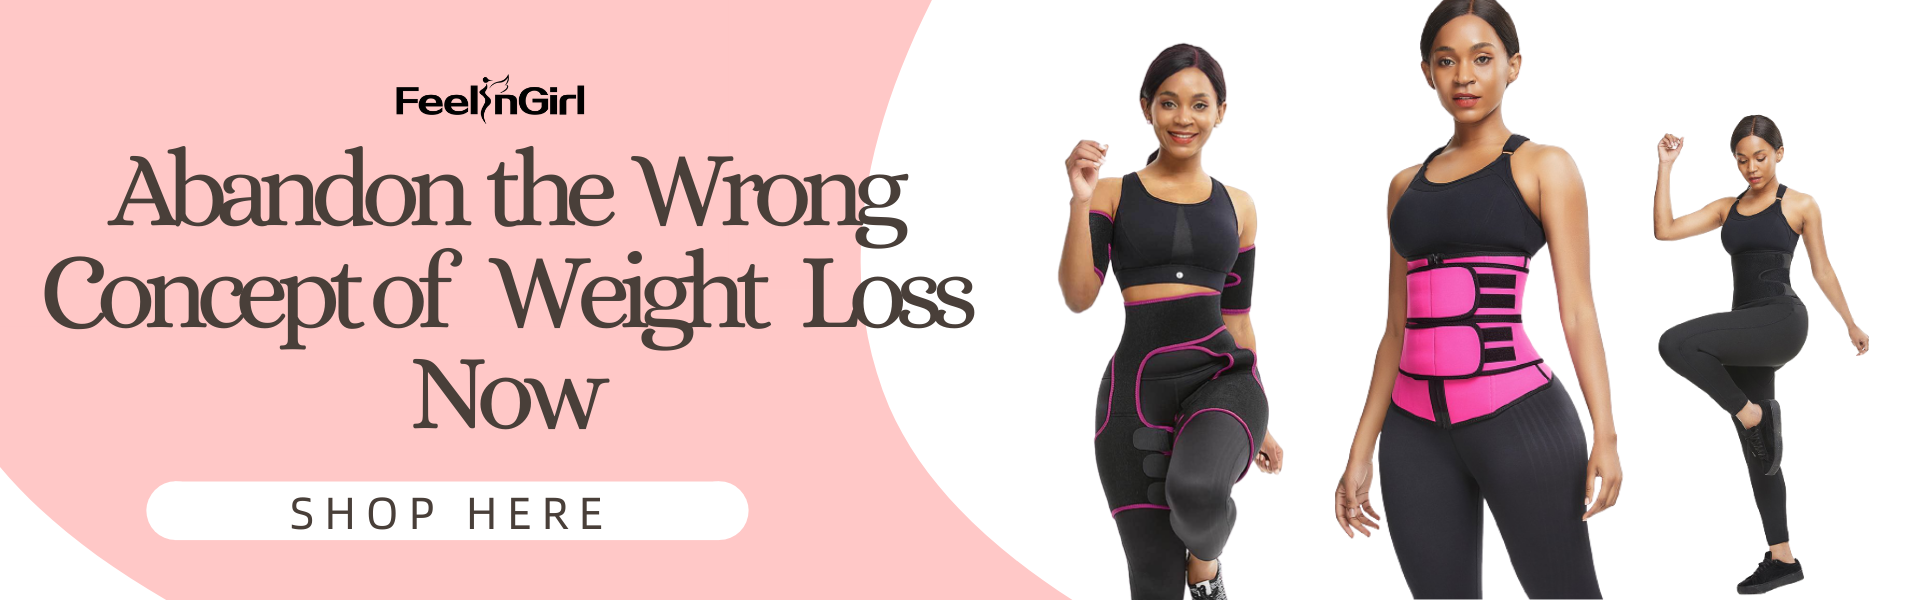 Abandon the Wrong Concept of Weight Loss Now